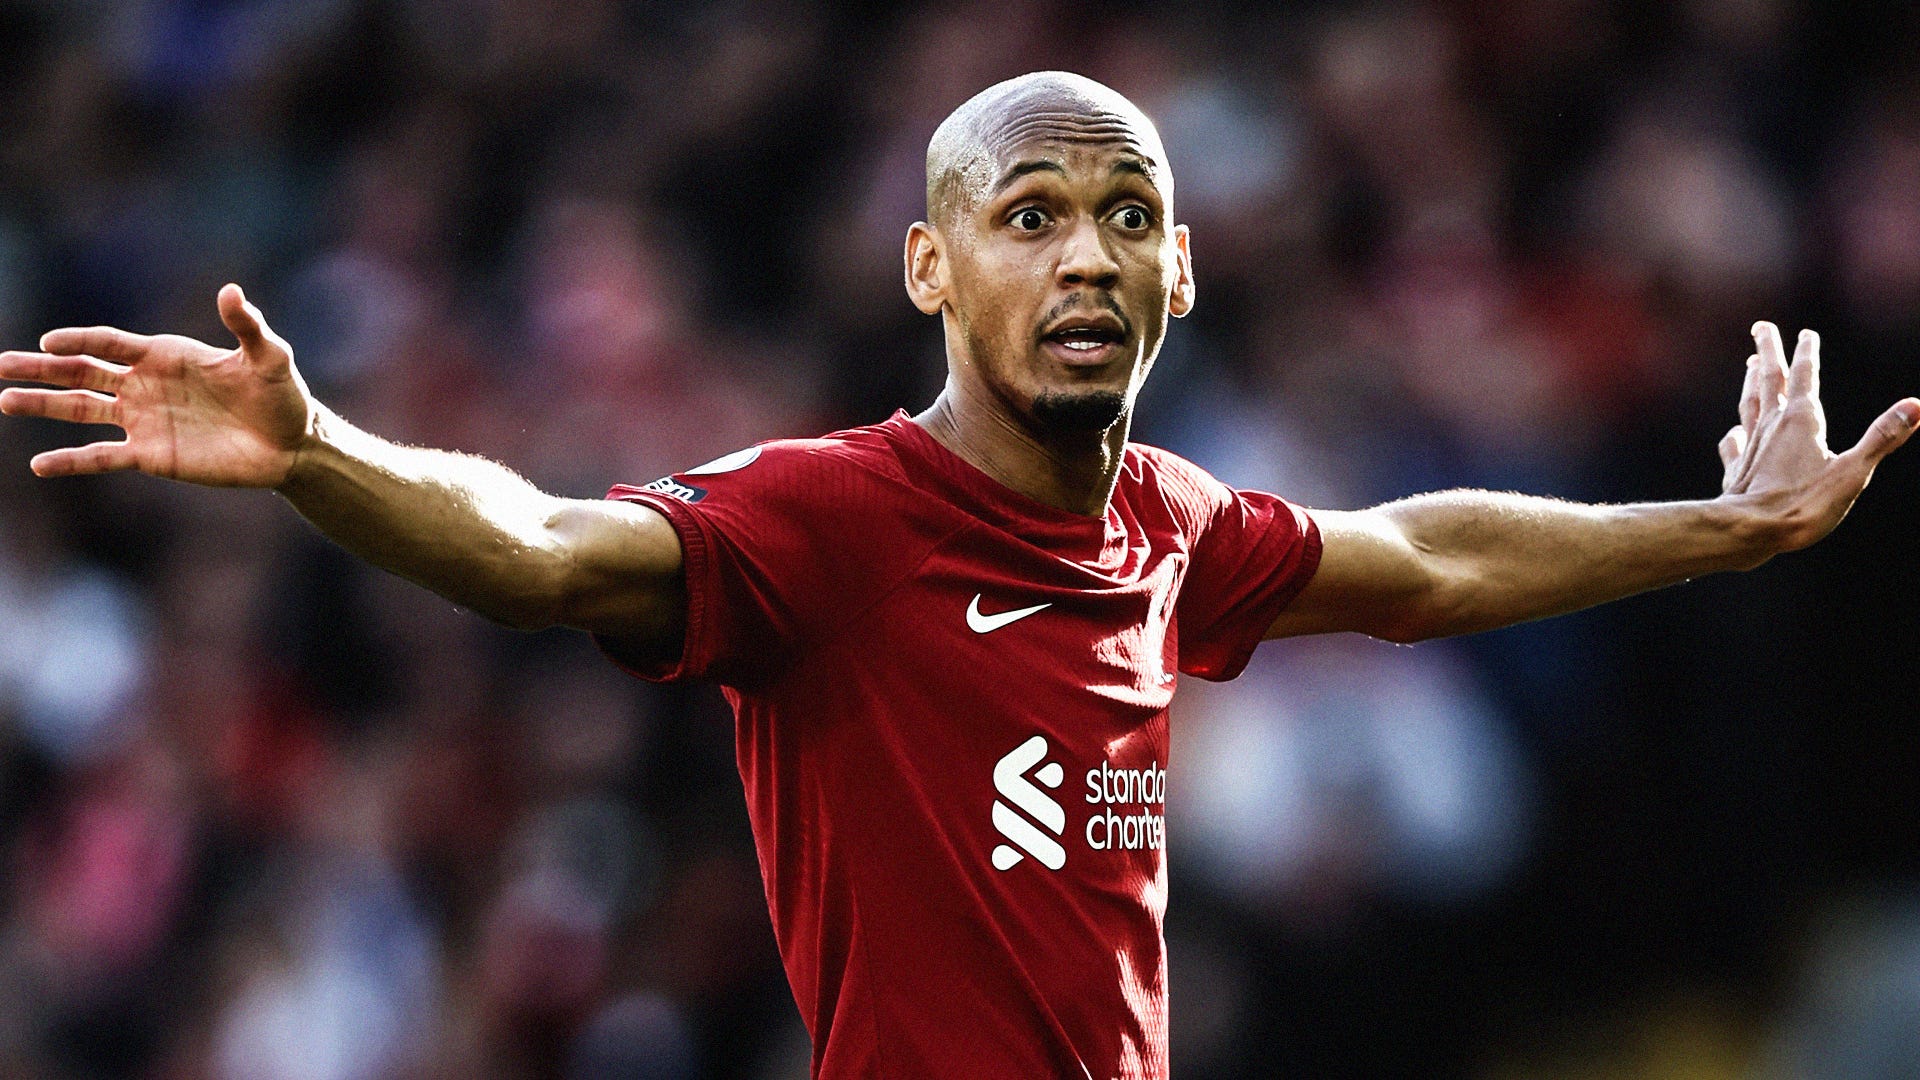 Liverpool lost without their lighthouse: Fabinho's struggles expose Klopp's  midfield issues | Goal.com